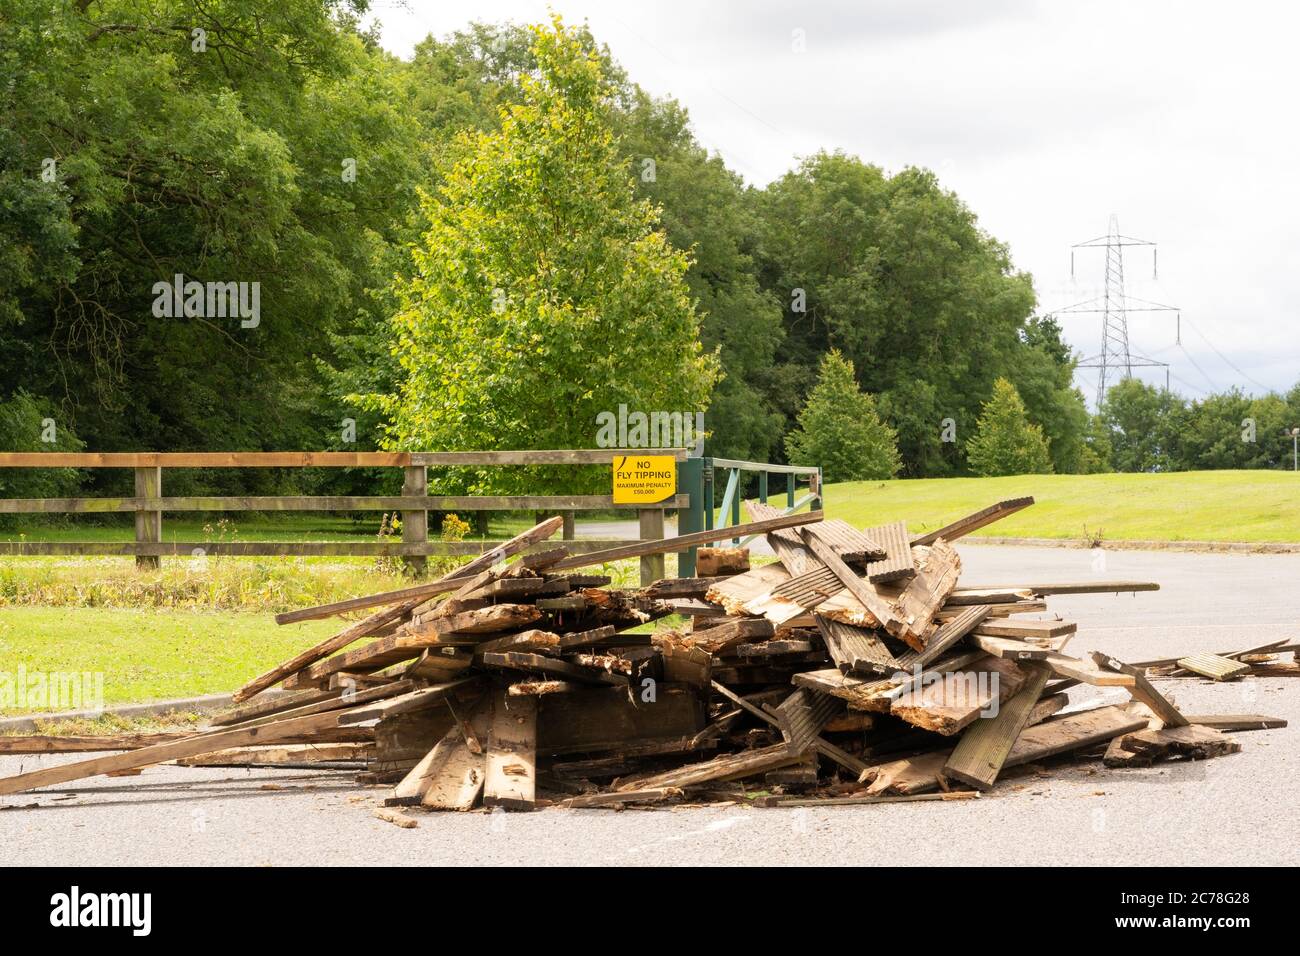 Illegal fly tipping and dumping of waste in a lane with a sign saying 'No fly tipping' in the background.  Bishop's Stortford, Hertfordshire. UK'. Stock Photo